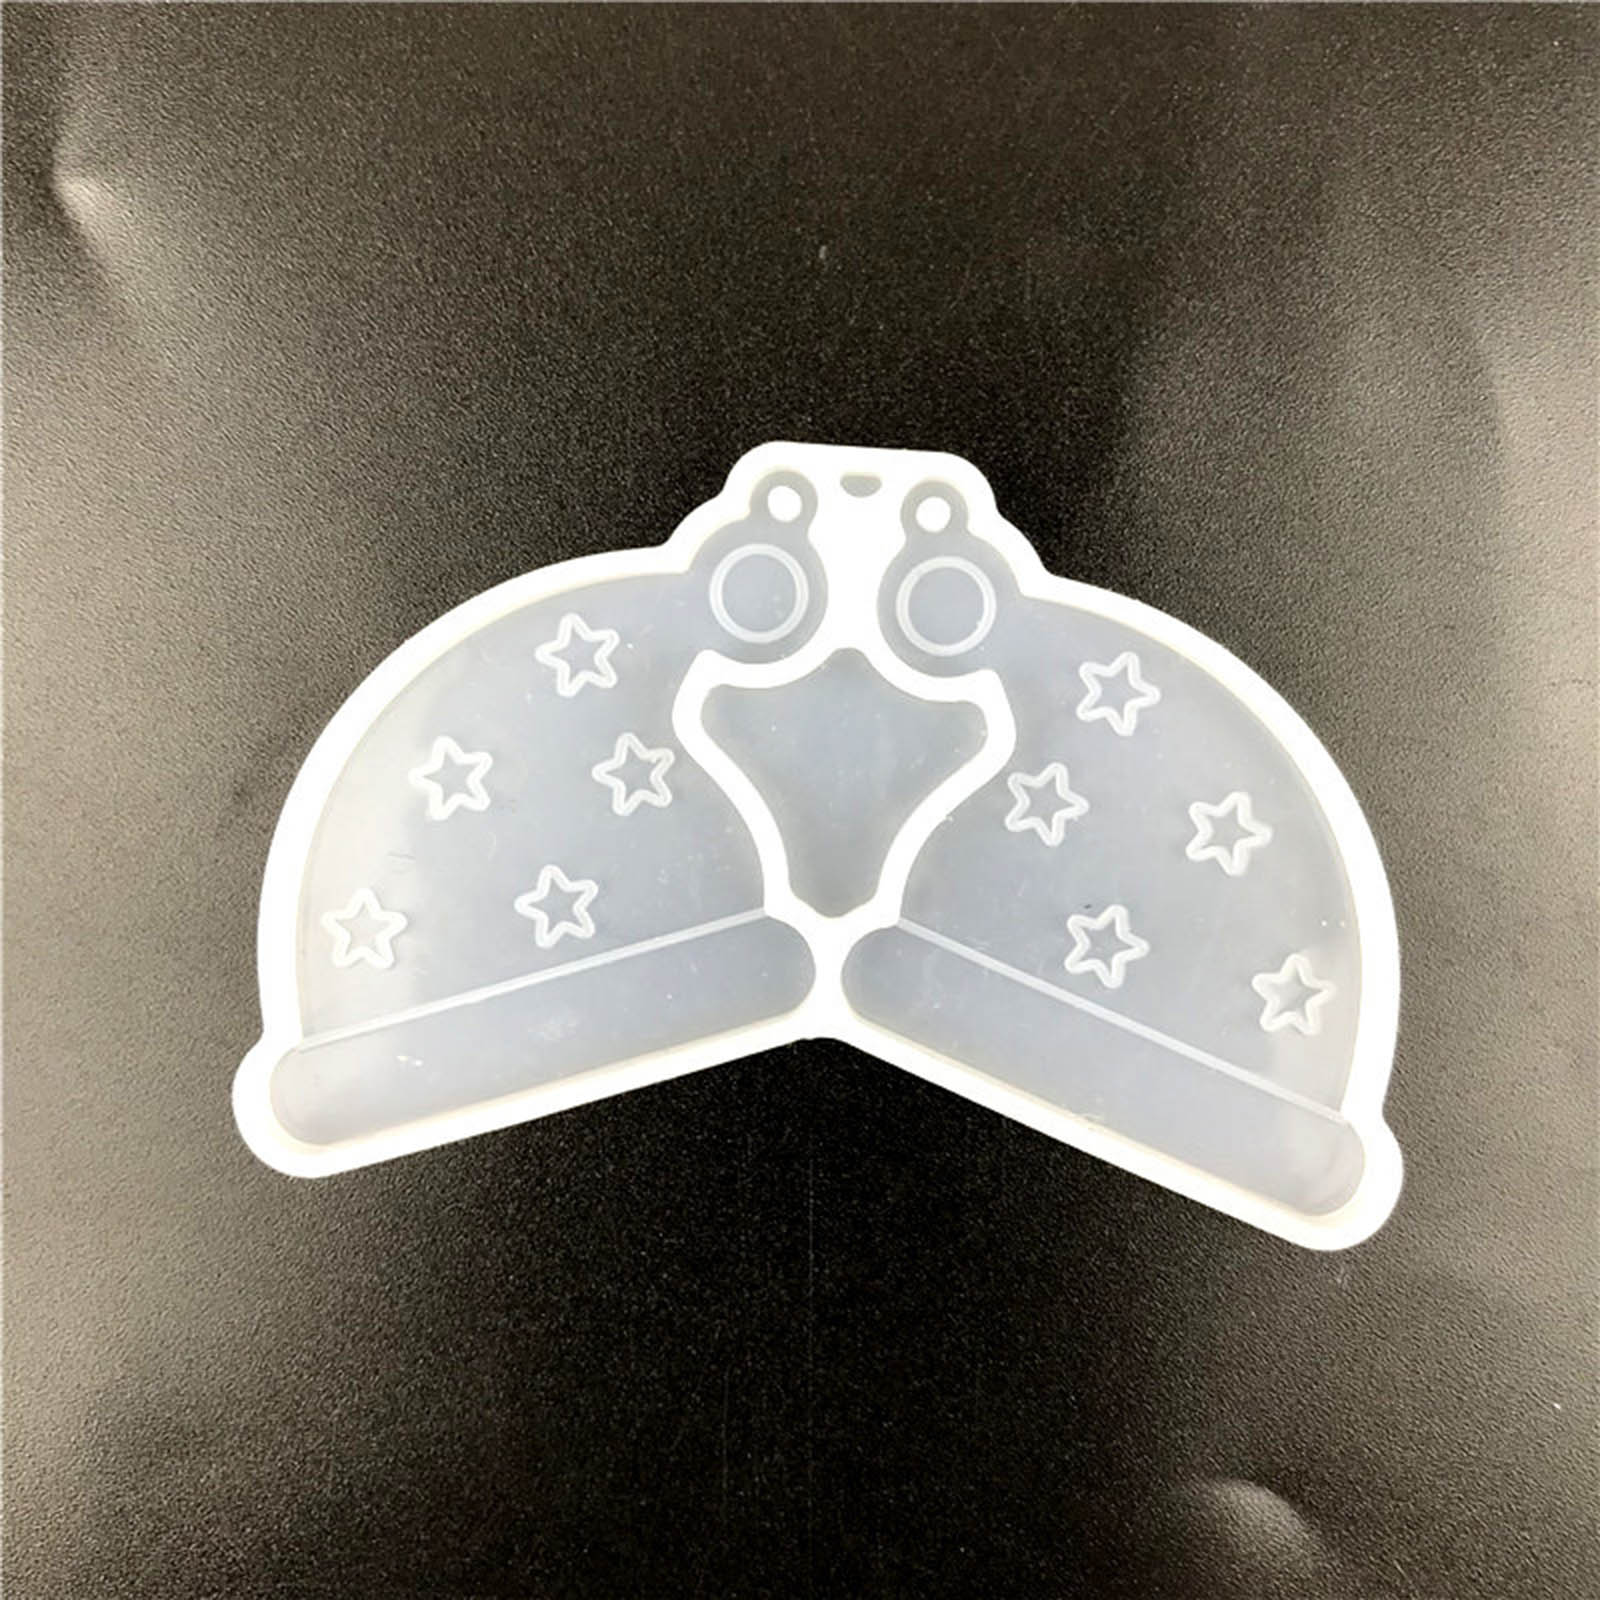 Picture of Silicone Resin Mold For Jewelry Making Earring Pendant Christmas Hats White 7.8cm x 5.3cm, 1 Piece